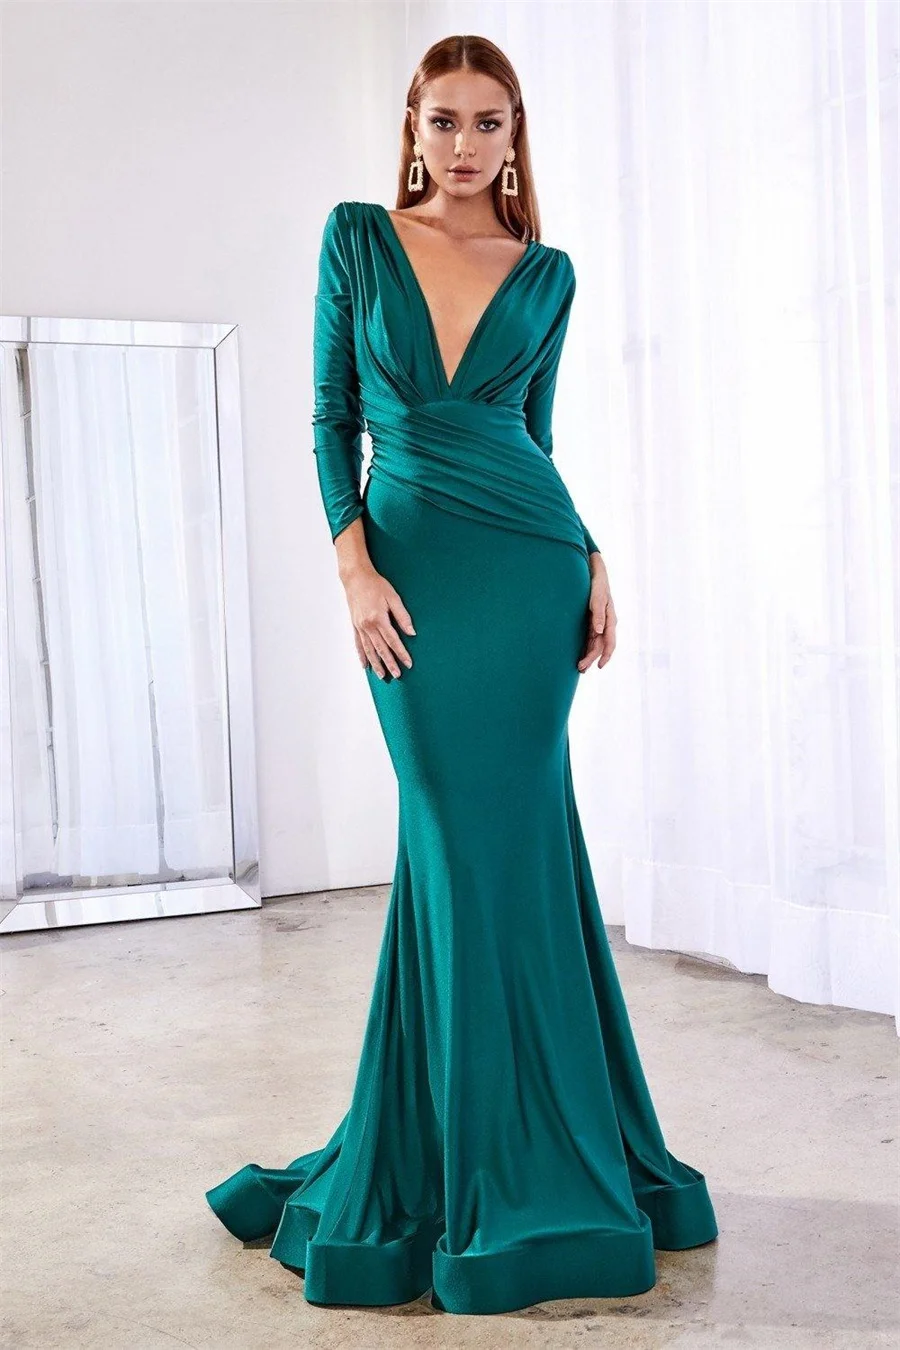 Formal Deep V-Neck Curvy Long Prom Dress Full Sleeves Satin Open Back Formal Party Gown Ruched Waist Sweep Train Evening Dress